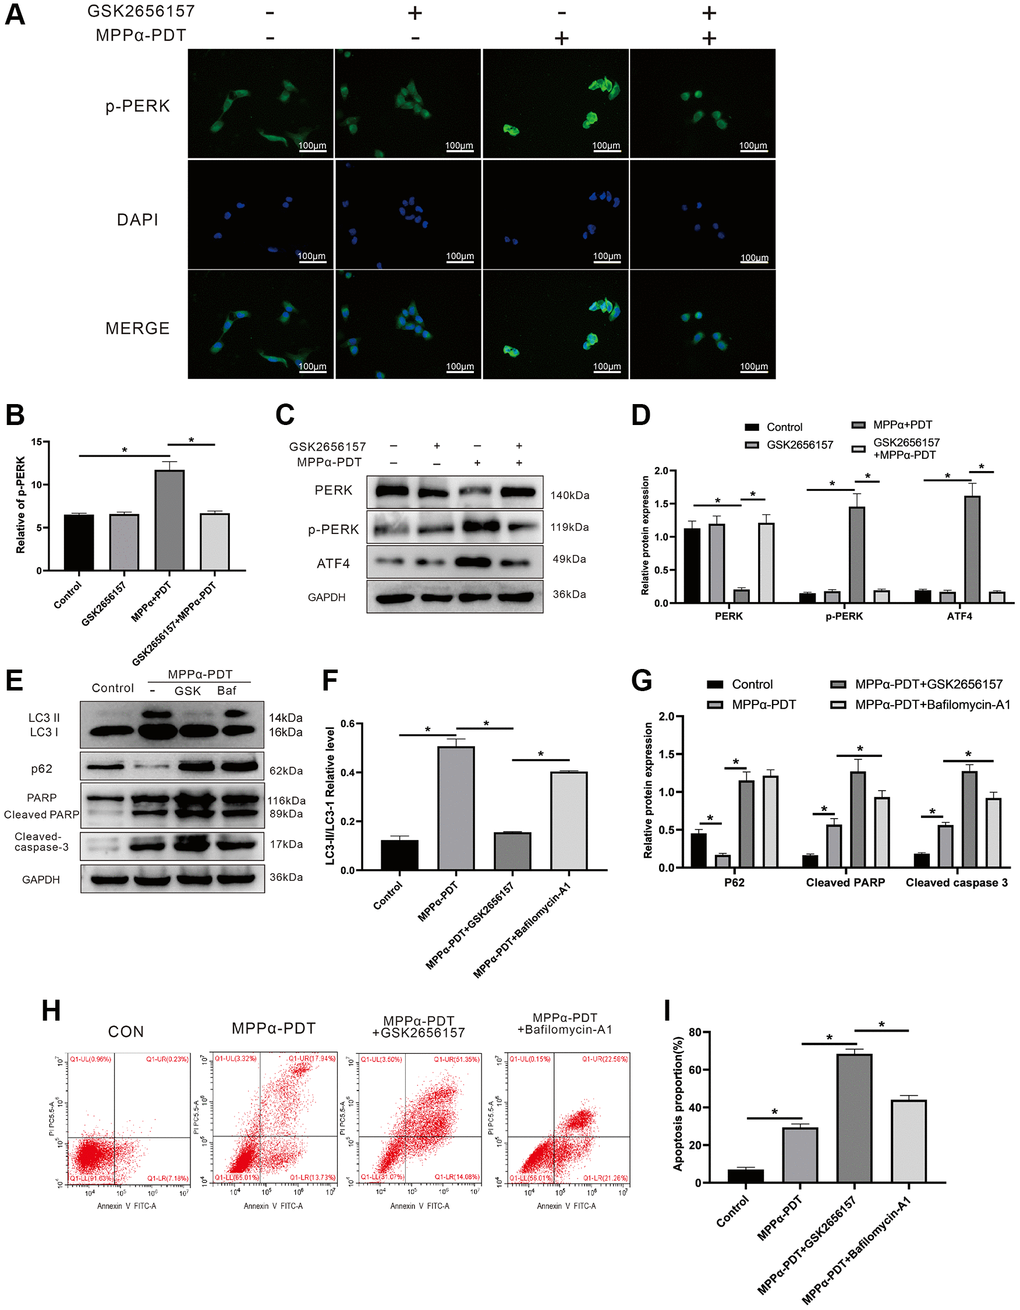 Inhibiting PERK may suppress autophagy induced by MPPα-PDT, and enhance the anti-tumor ability of MPPα-PDT in HOS cells. HOS cells in MPPα-PDT+GSK2656157 group were pretreated with 5 mM GSK2656157 for 1 h before MPPα-PDT treatment. HOS cells in MPPα-PDT + Bafilomycin A1 group were pretreated with 100 nM bafilomycin A1 for 2 h before MPPα-PDT treatment. (A, B) Immunofluorescence analysis of p-PERK levels (magnification: ×400). (C–G) After indicated treatments, cells were harvested and PERK, p-PERK, ATF4, LC3-II/LC3-I, p62, cleaved caspase-3, and cleaved PARP levels determined by western blot. (H, I) Apoptotic rate was examined by flow cytometry. Data are shown as mean ± SD of 3 independent experiments. *P 